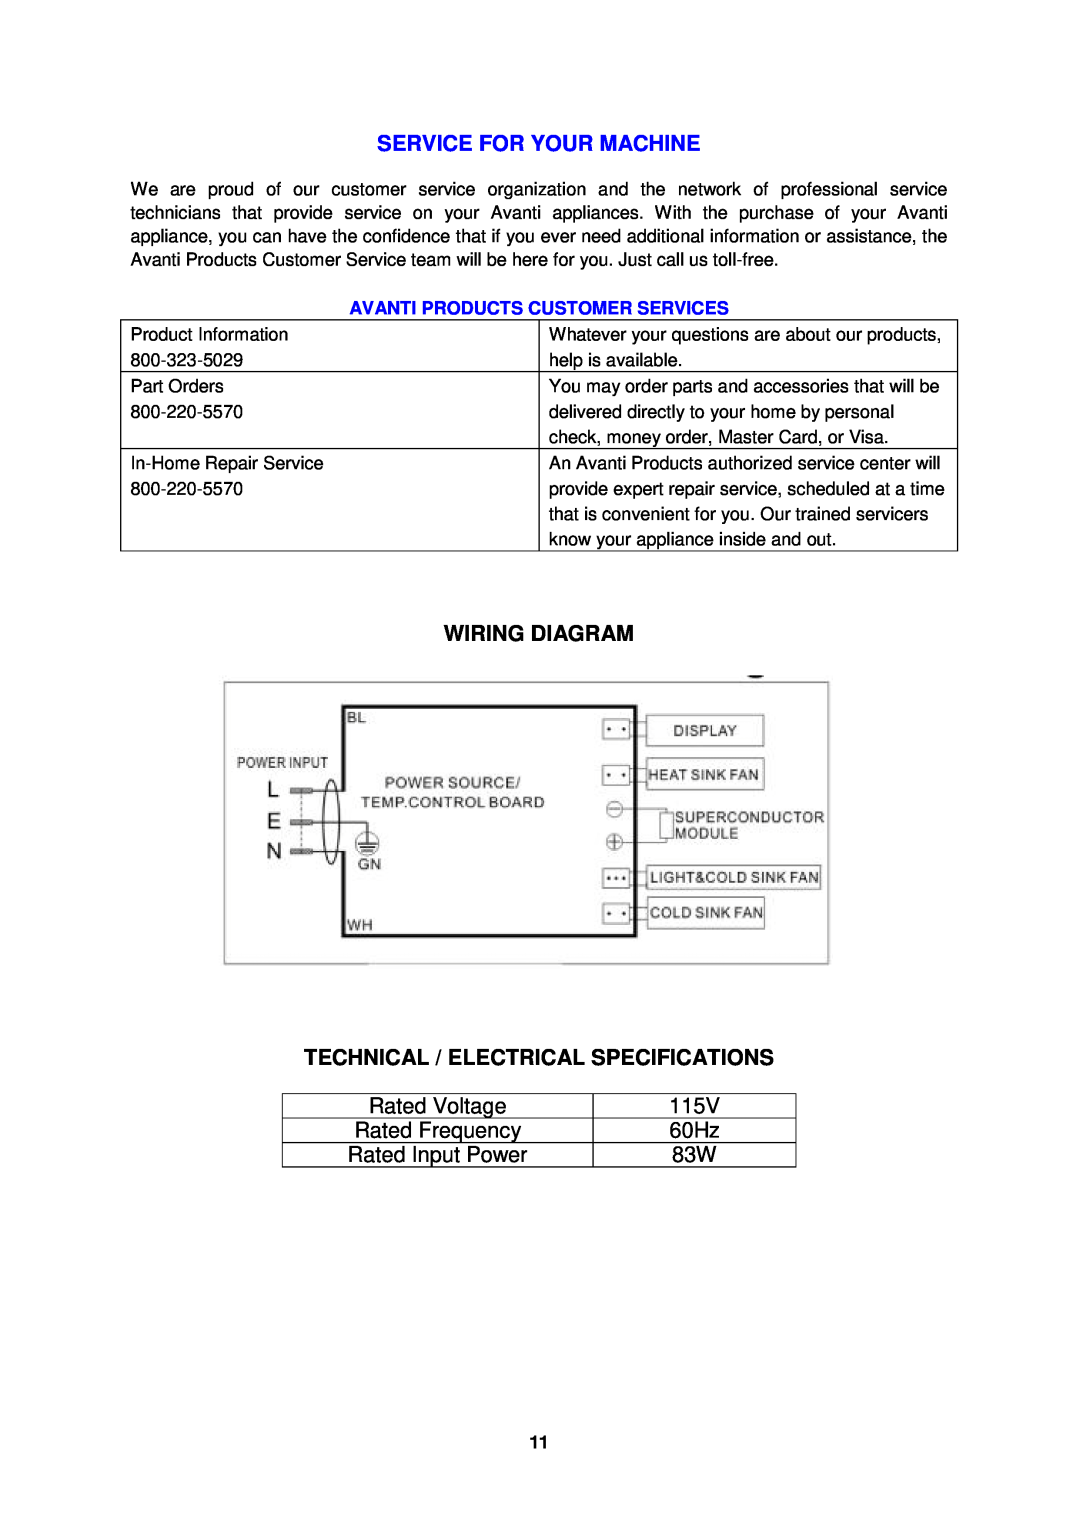 Avanti SWBC250D instruction manual Service For Your Machine, Rated Voltage, 115V, Rated Frequency, 60Hz, Rated Input Power 